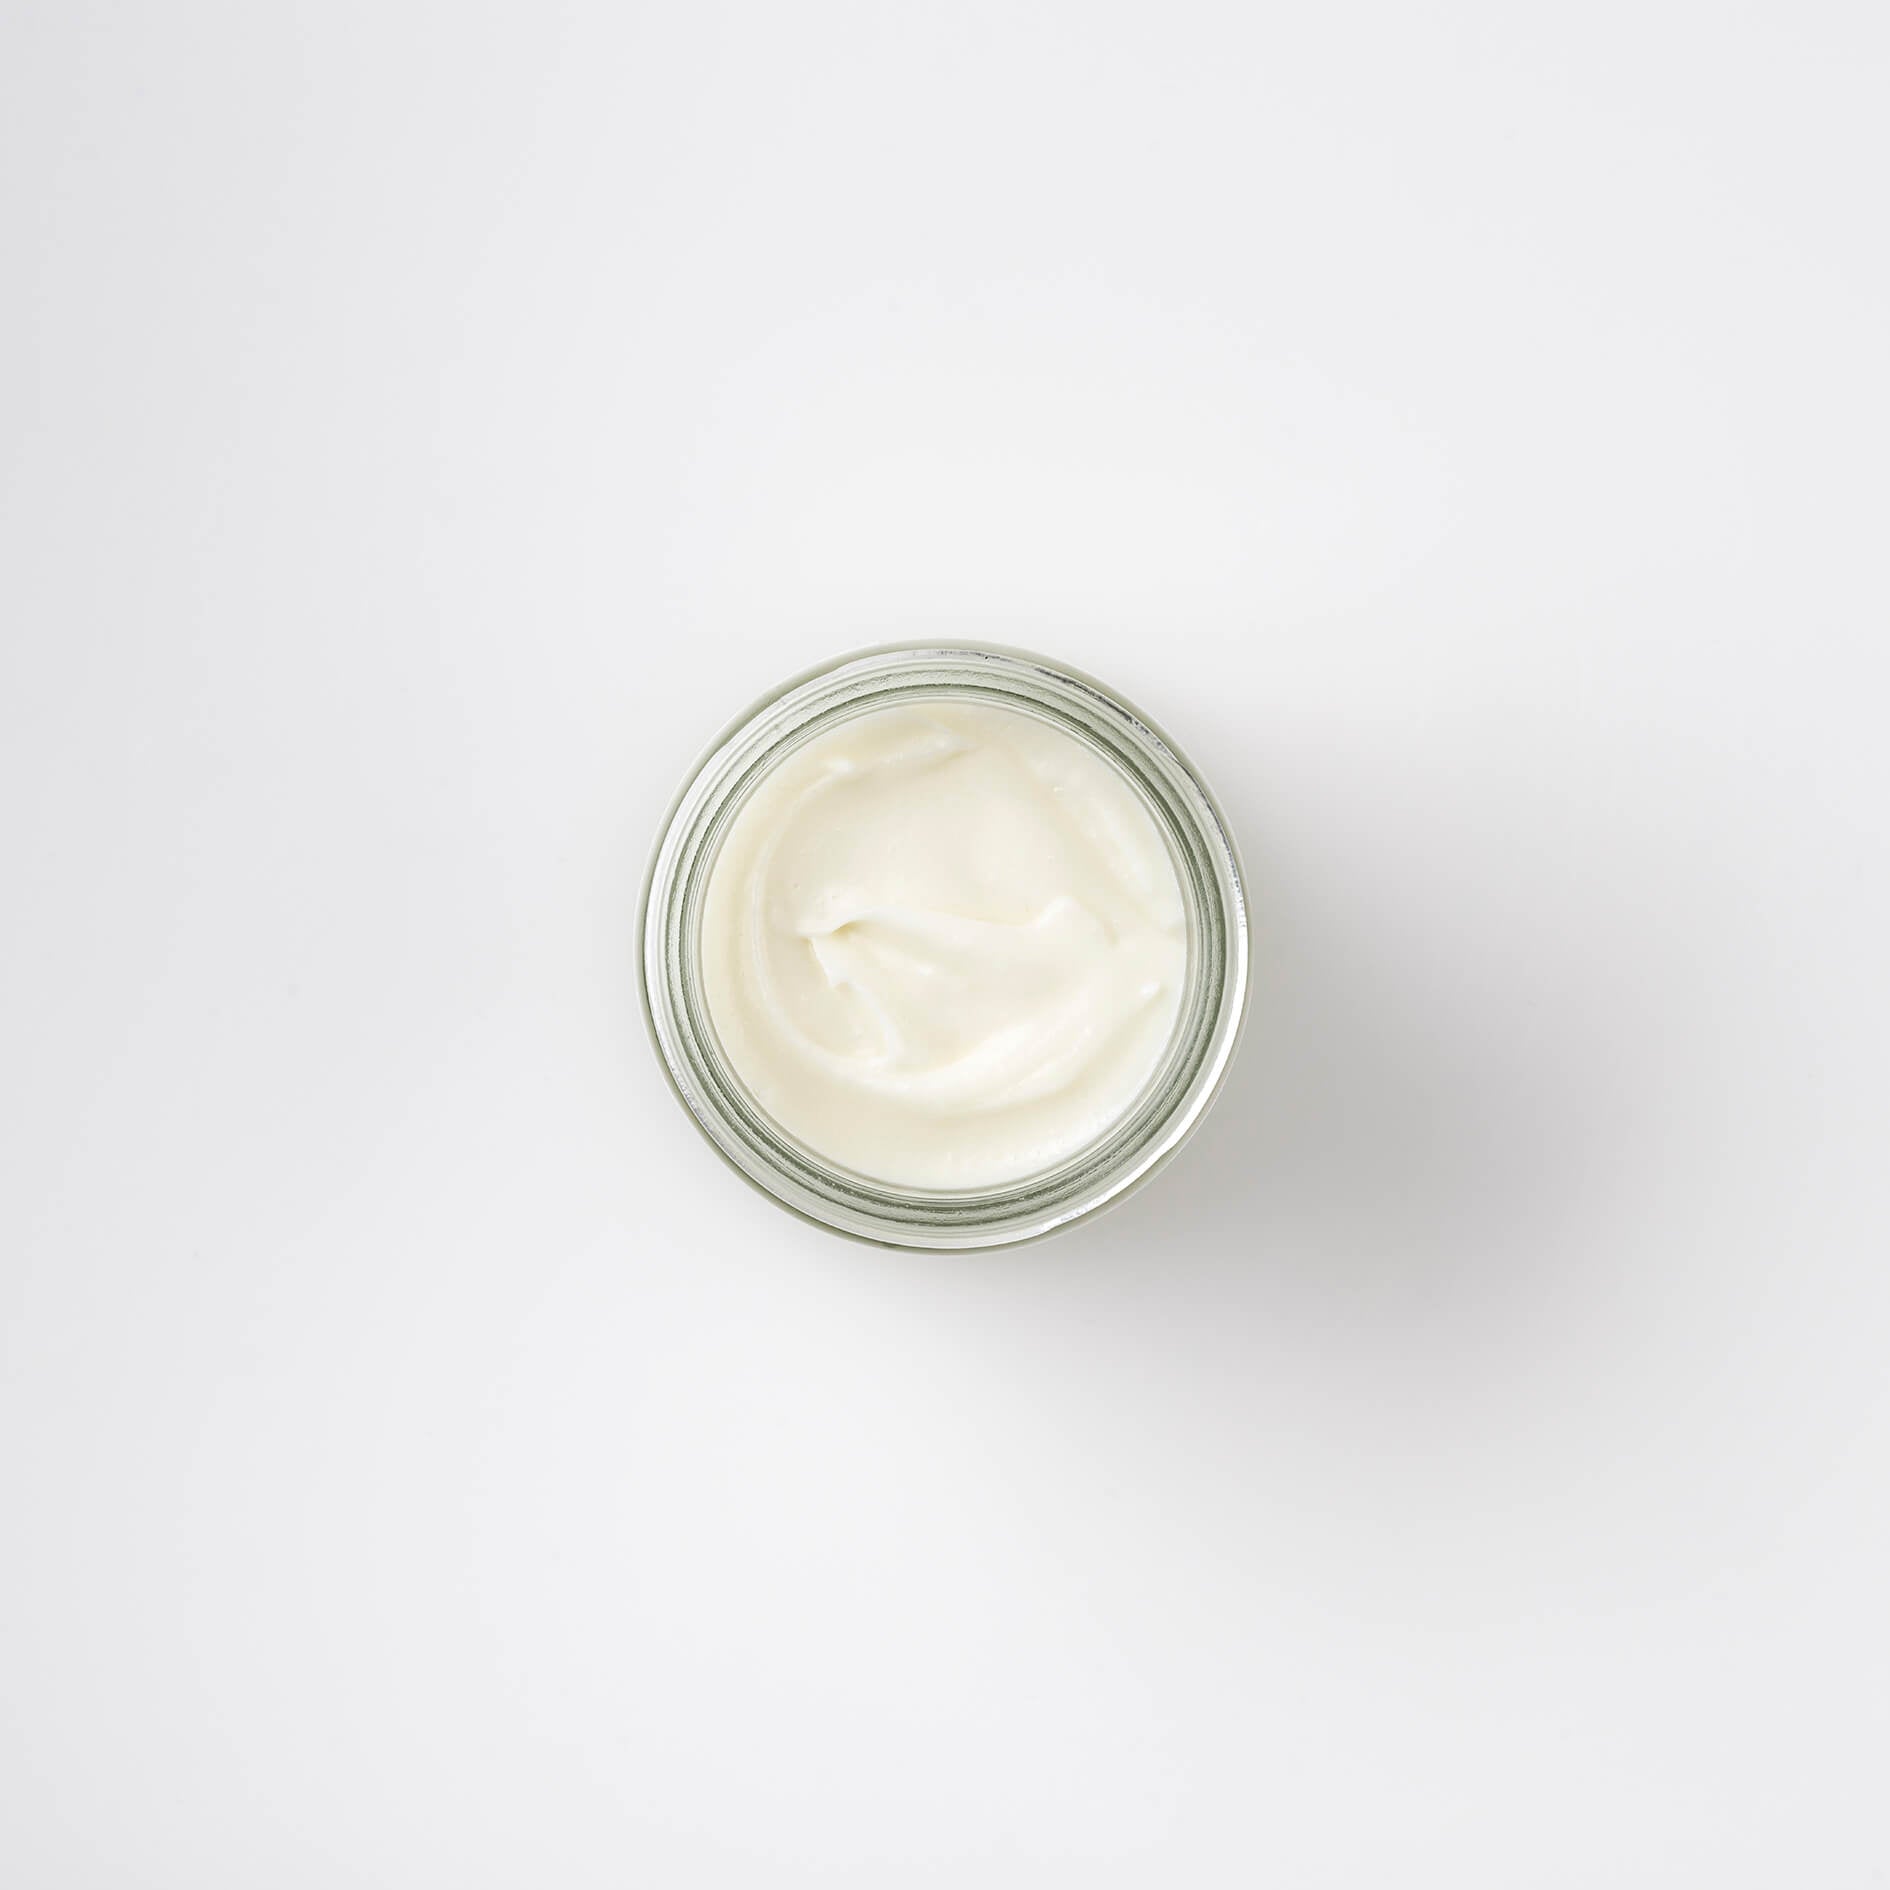 Top view of a 60ml clear glass jar of Bristolmade rose geranium face cream, showing the creams smooth, white surface inside.